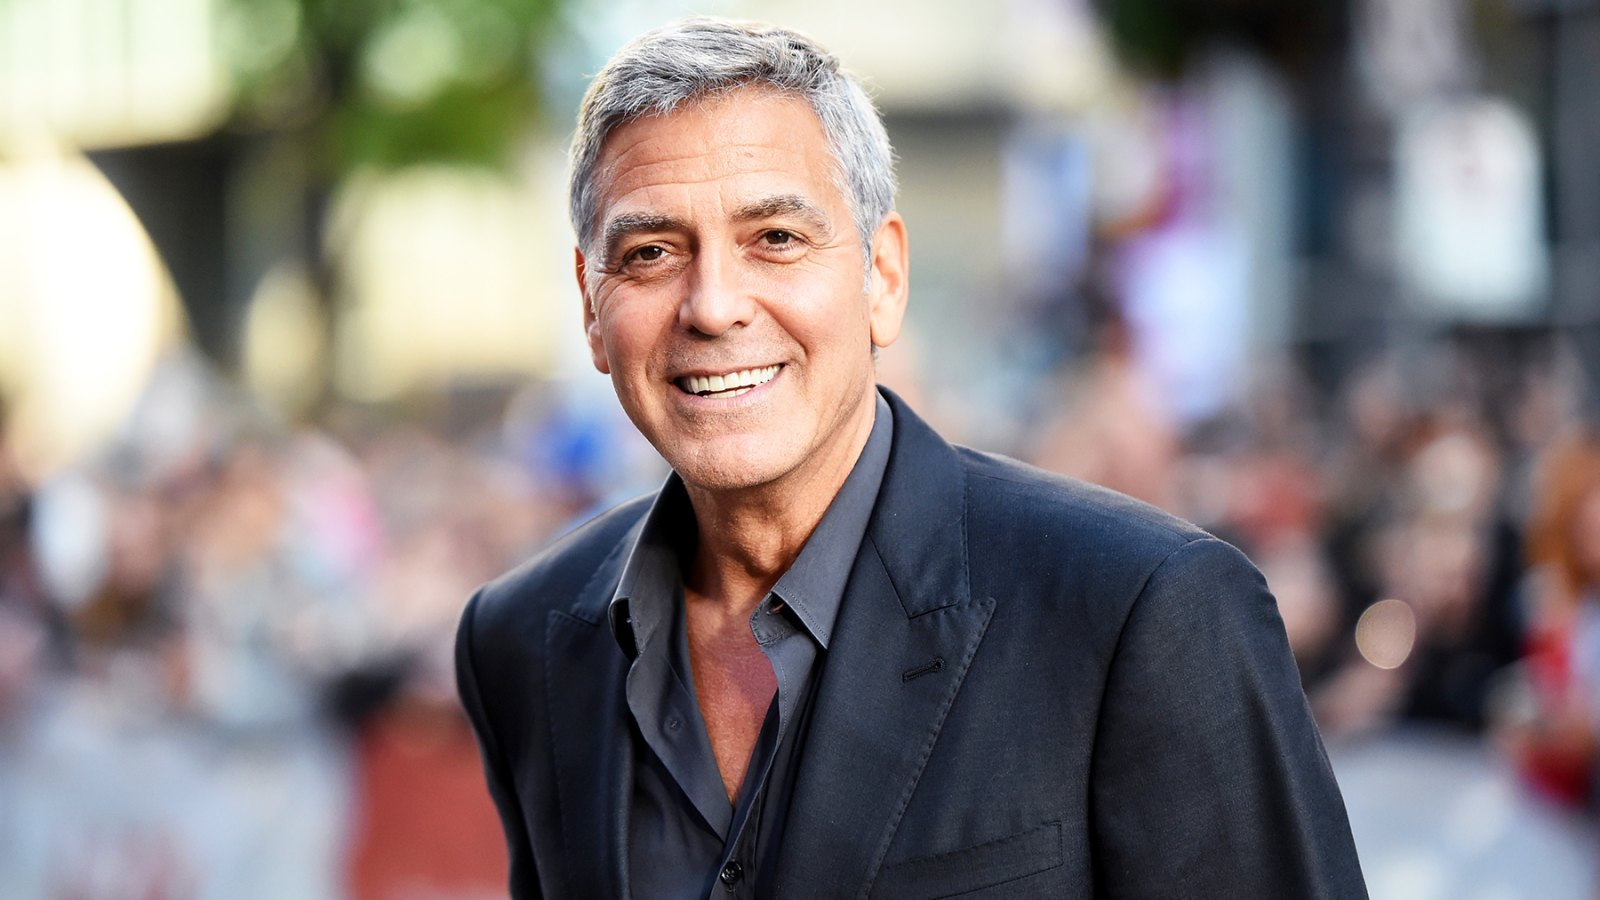 George Clooney Gifted Friends One Million Dollars